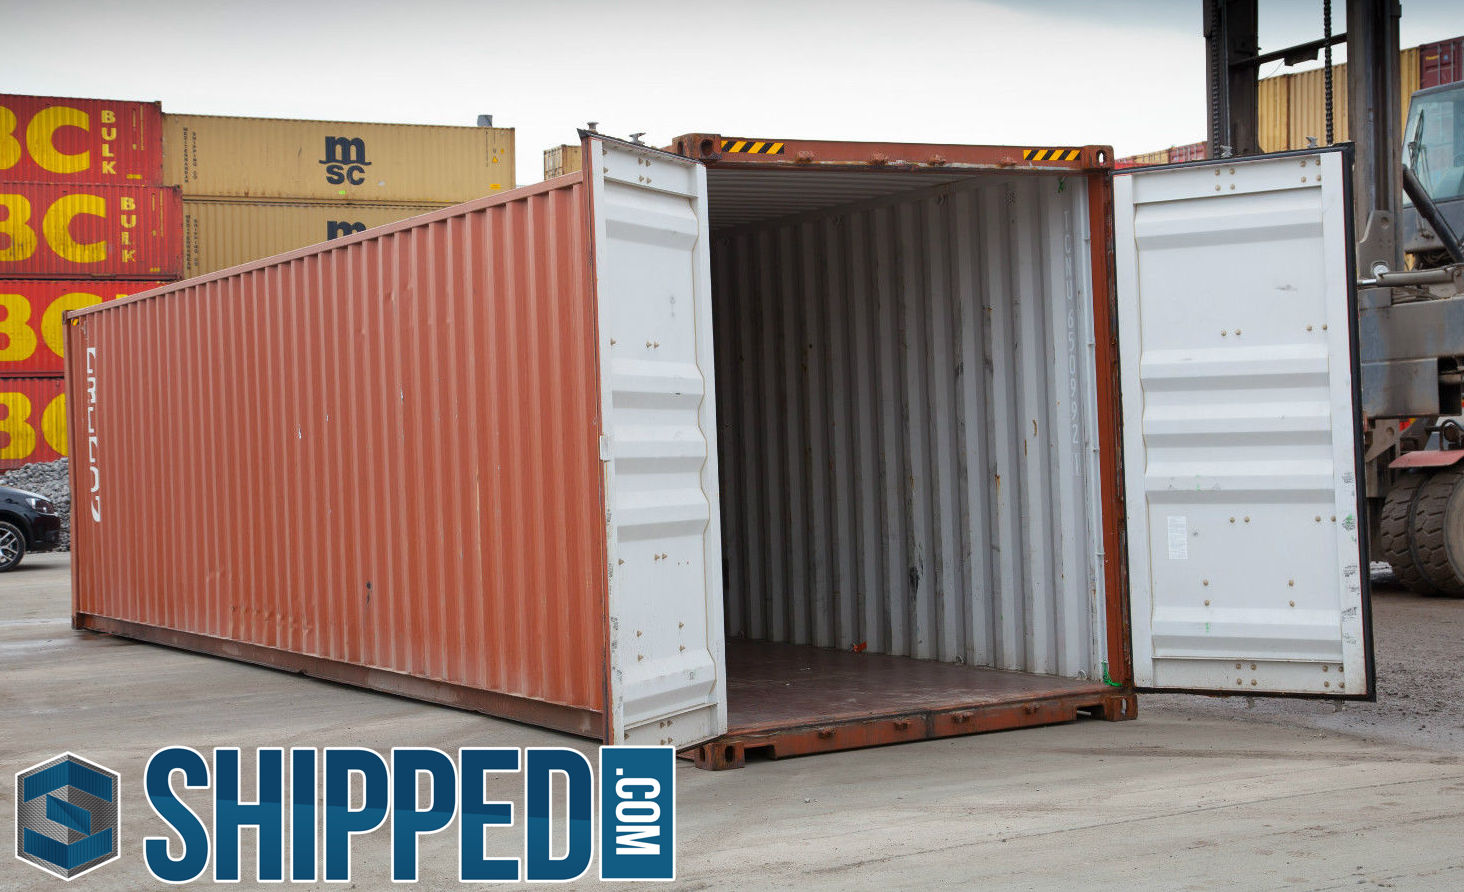 Buy, Rent & Rent-to-own Shipping & Storage Containers